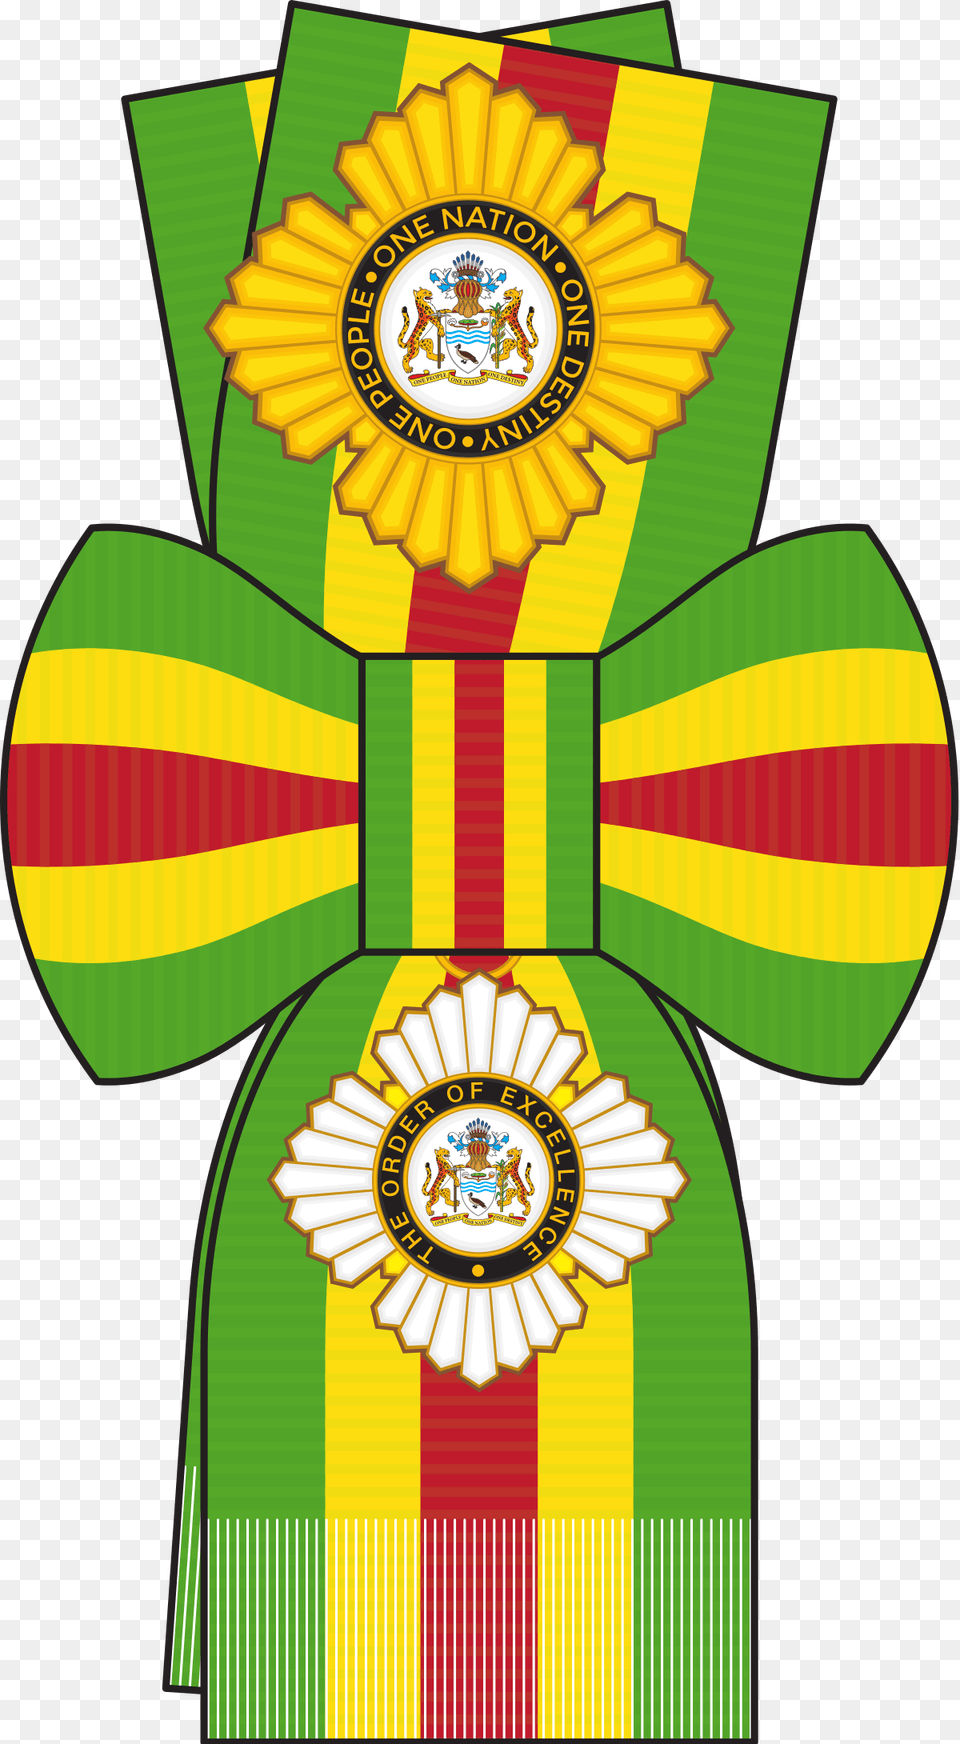 National Awards In Guyana, Accessories, Formal Wear, Tie, Logo Png Image